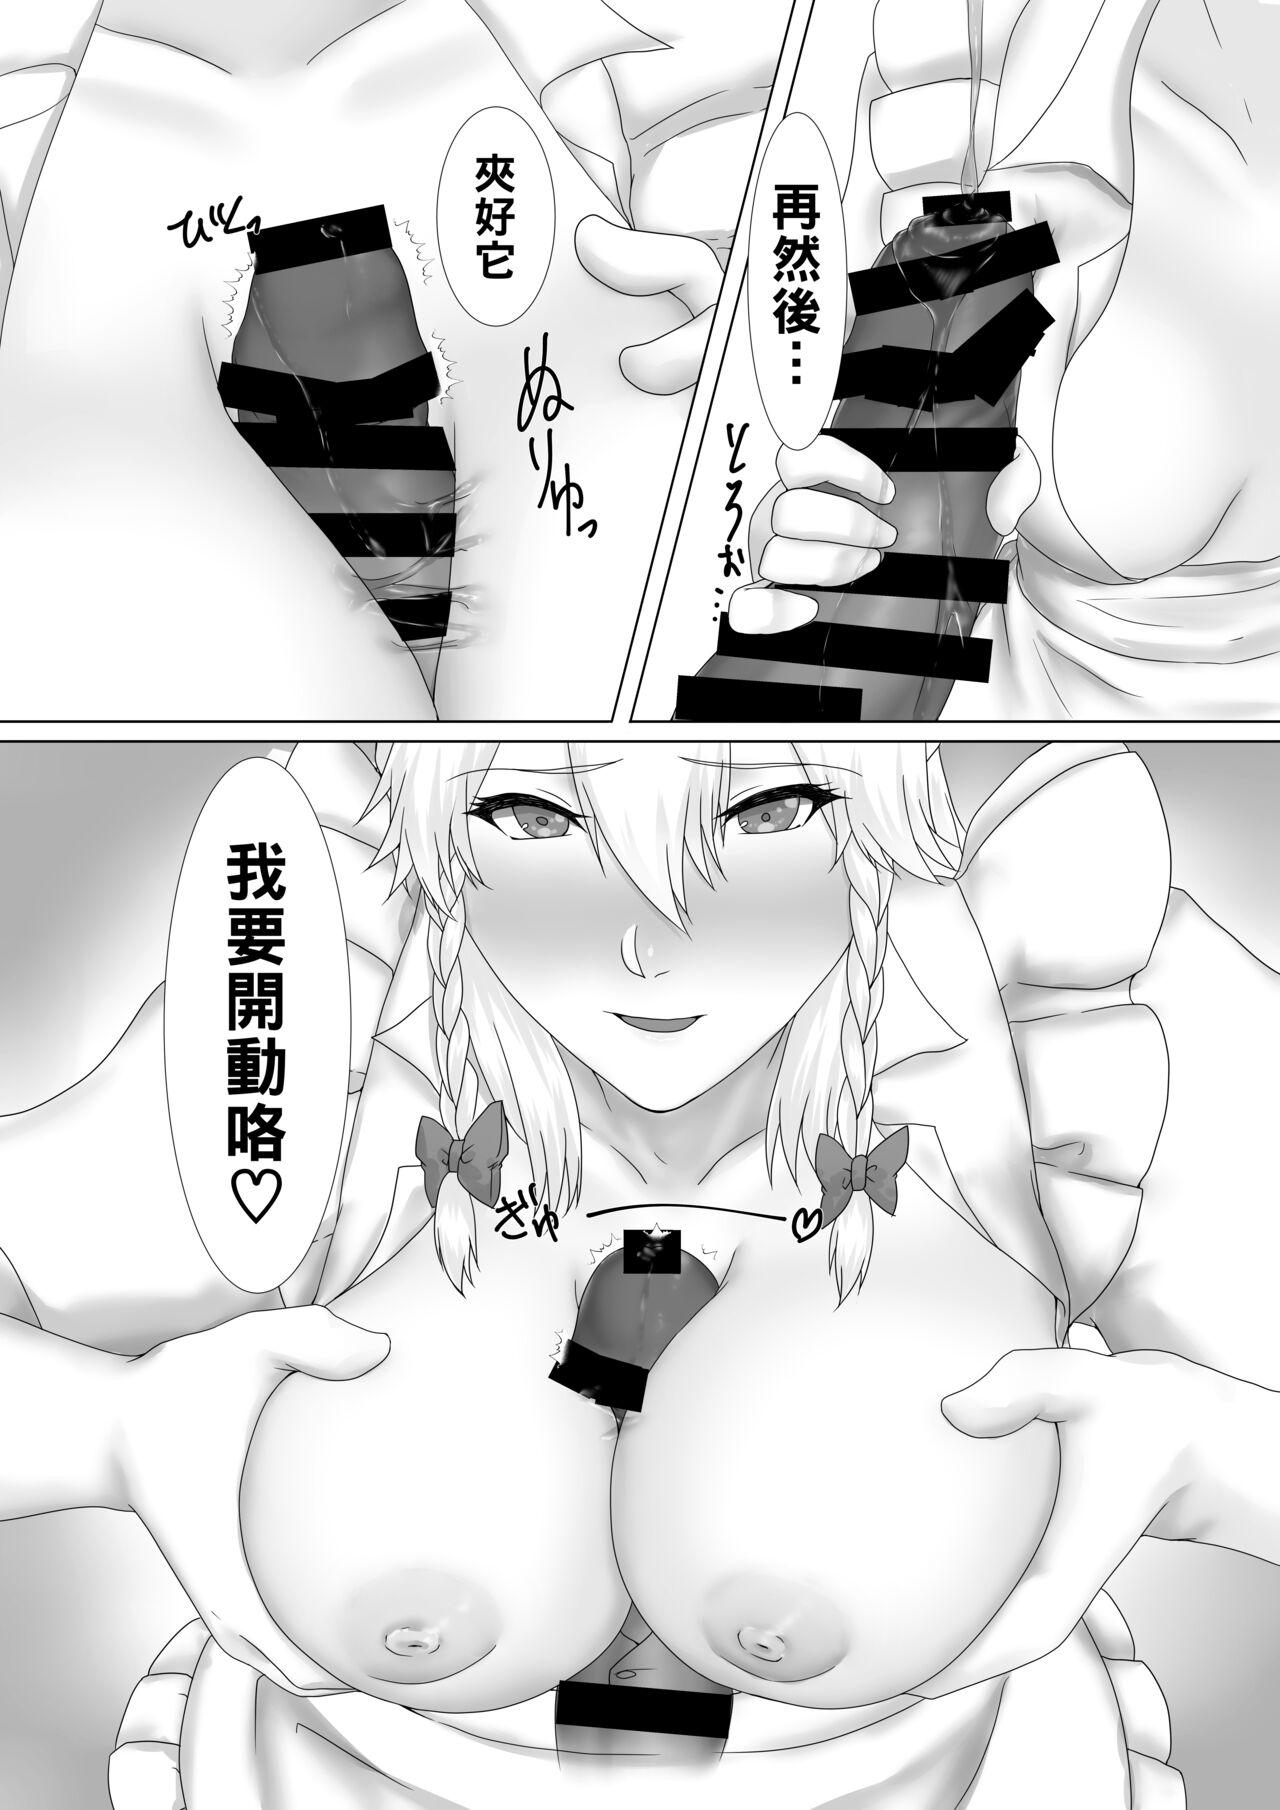 Spycam [糖質過多ぱると (只野めざし)] 咲夜さんとセフレになる本 (東方Project)（Chinese） - Touhou project Gay 3some - Page 12